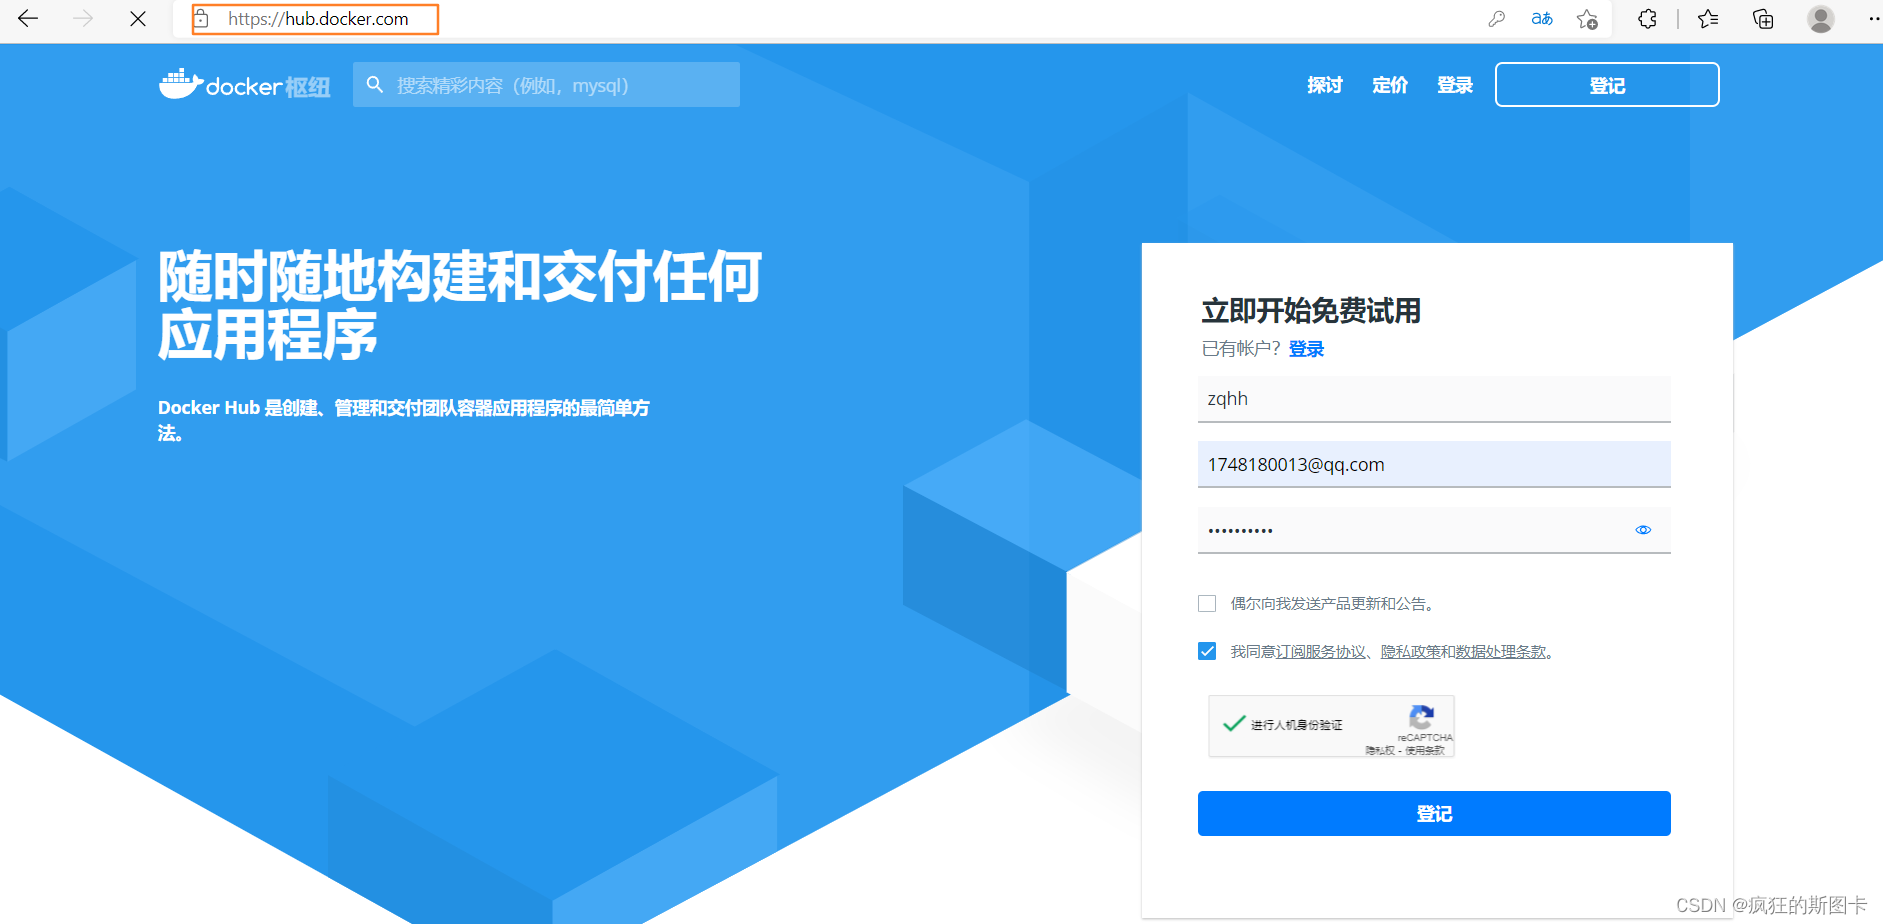 [External link image transfer failed, the source site may have anti-leech mechanism, it is recommended to save the image and upload it directly (img-sFFJYPfj-1646746700386) (C:\Users\zhuquanhao\Desktop\Screenshot command collection\linux\Docker\DockerBasic admin\16.bmp)]